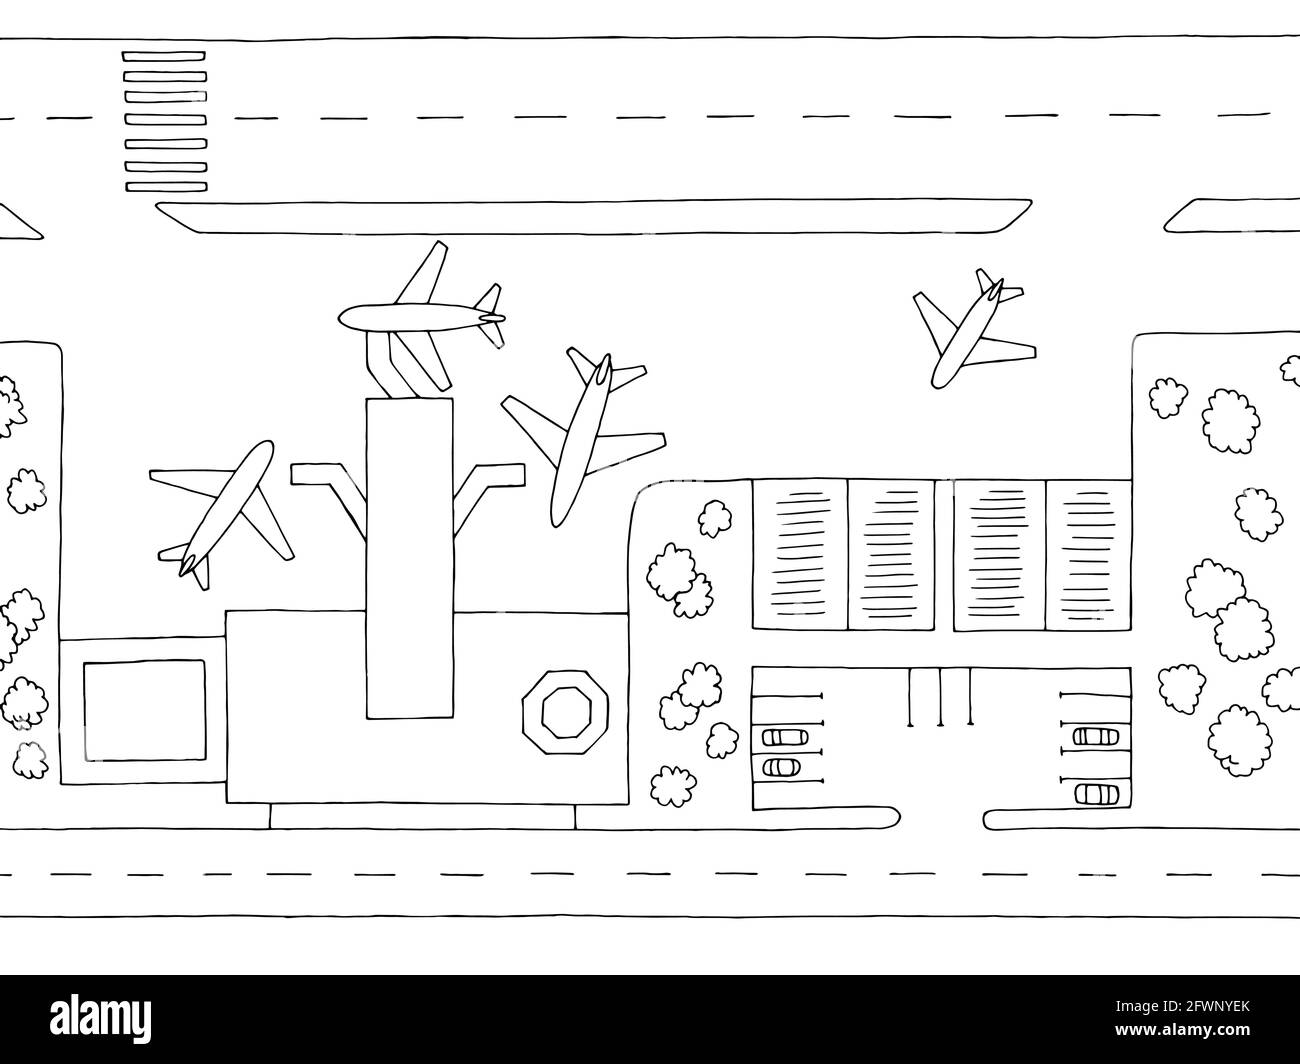 Airport top aerial view graphic black white plan sketch illustration vector Stock Vector